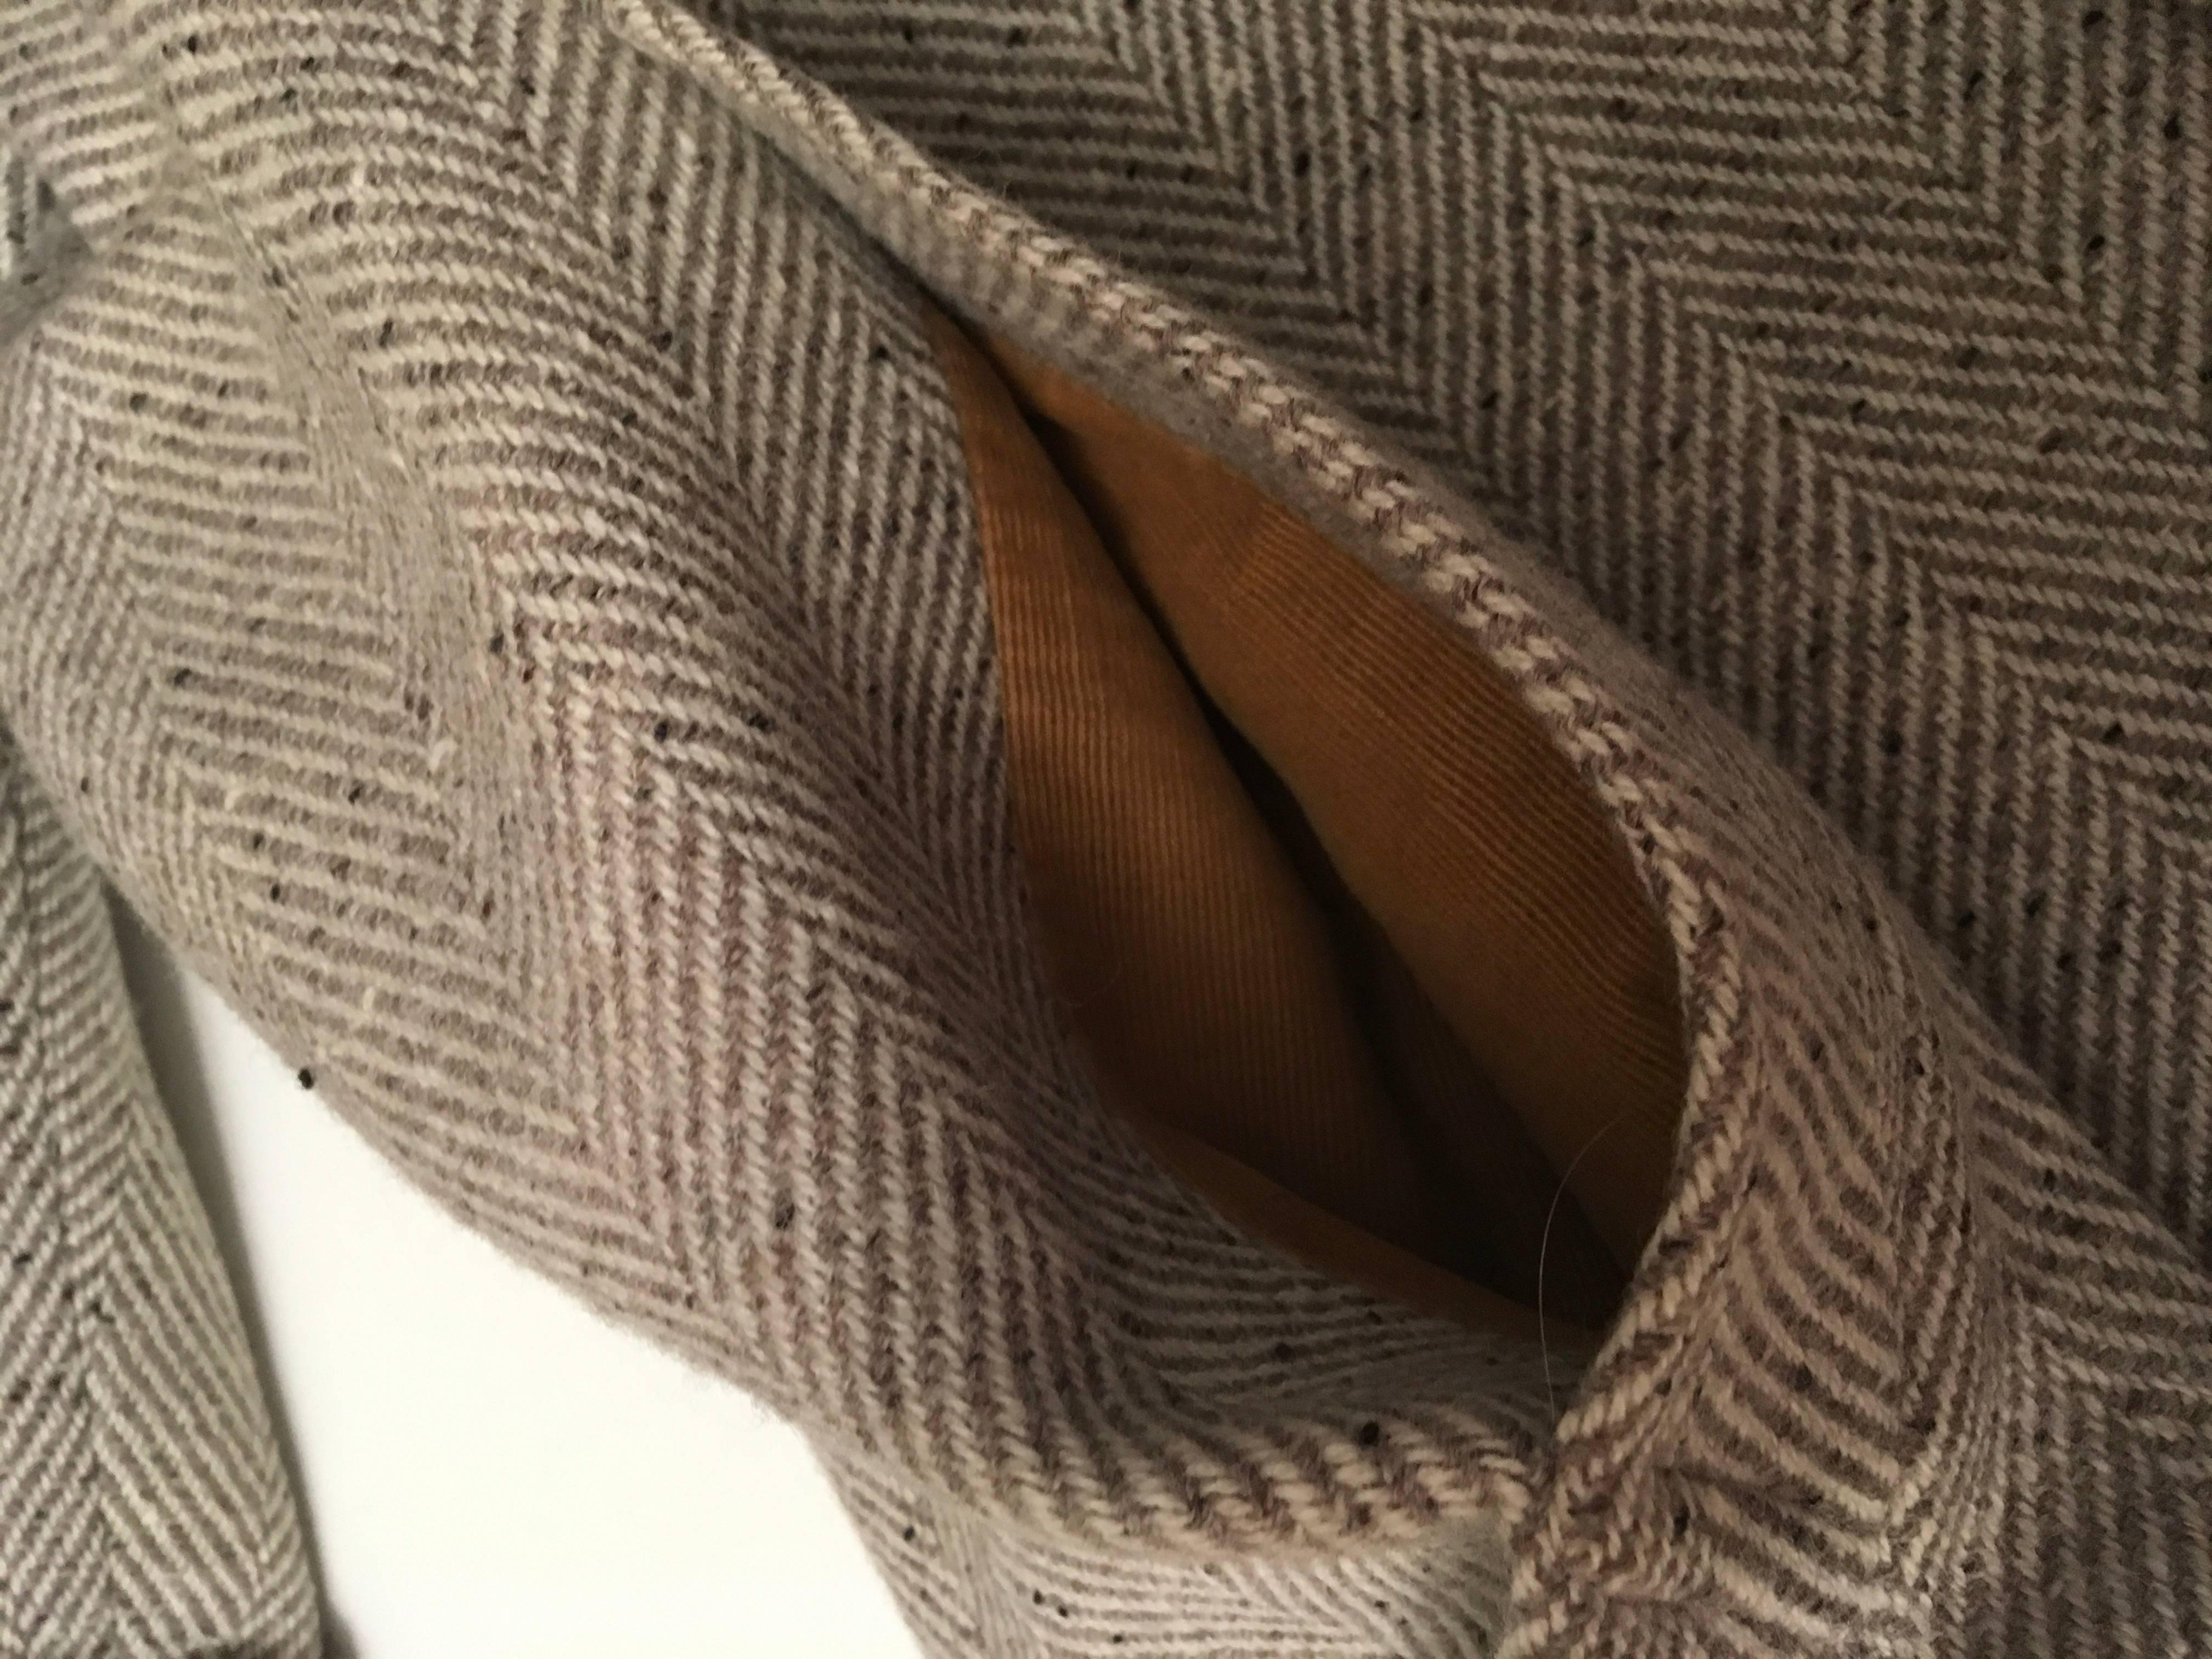 Presented here is a beautiful men’s vintage Hermes coat from the 1980’s. The coat was worn 2 times. The wool fabric is a beautiful gray herringbone of cream and taupe with speckles throughout. The sizing is a French 54. It is made in Italy.

It is a